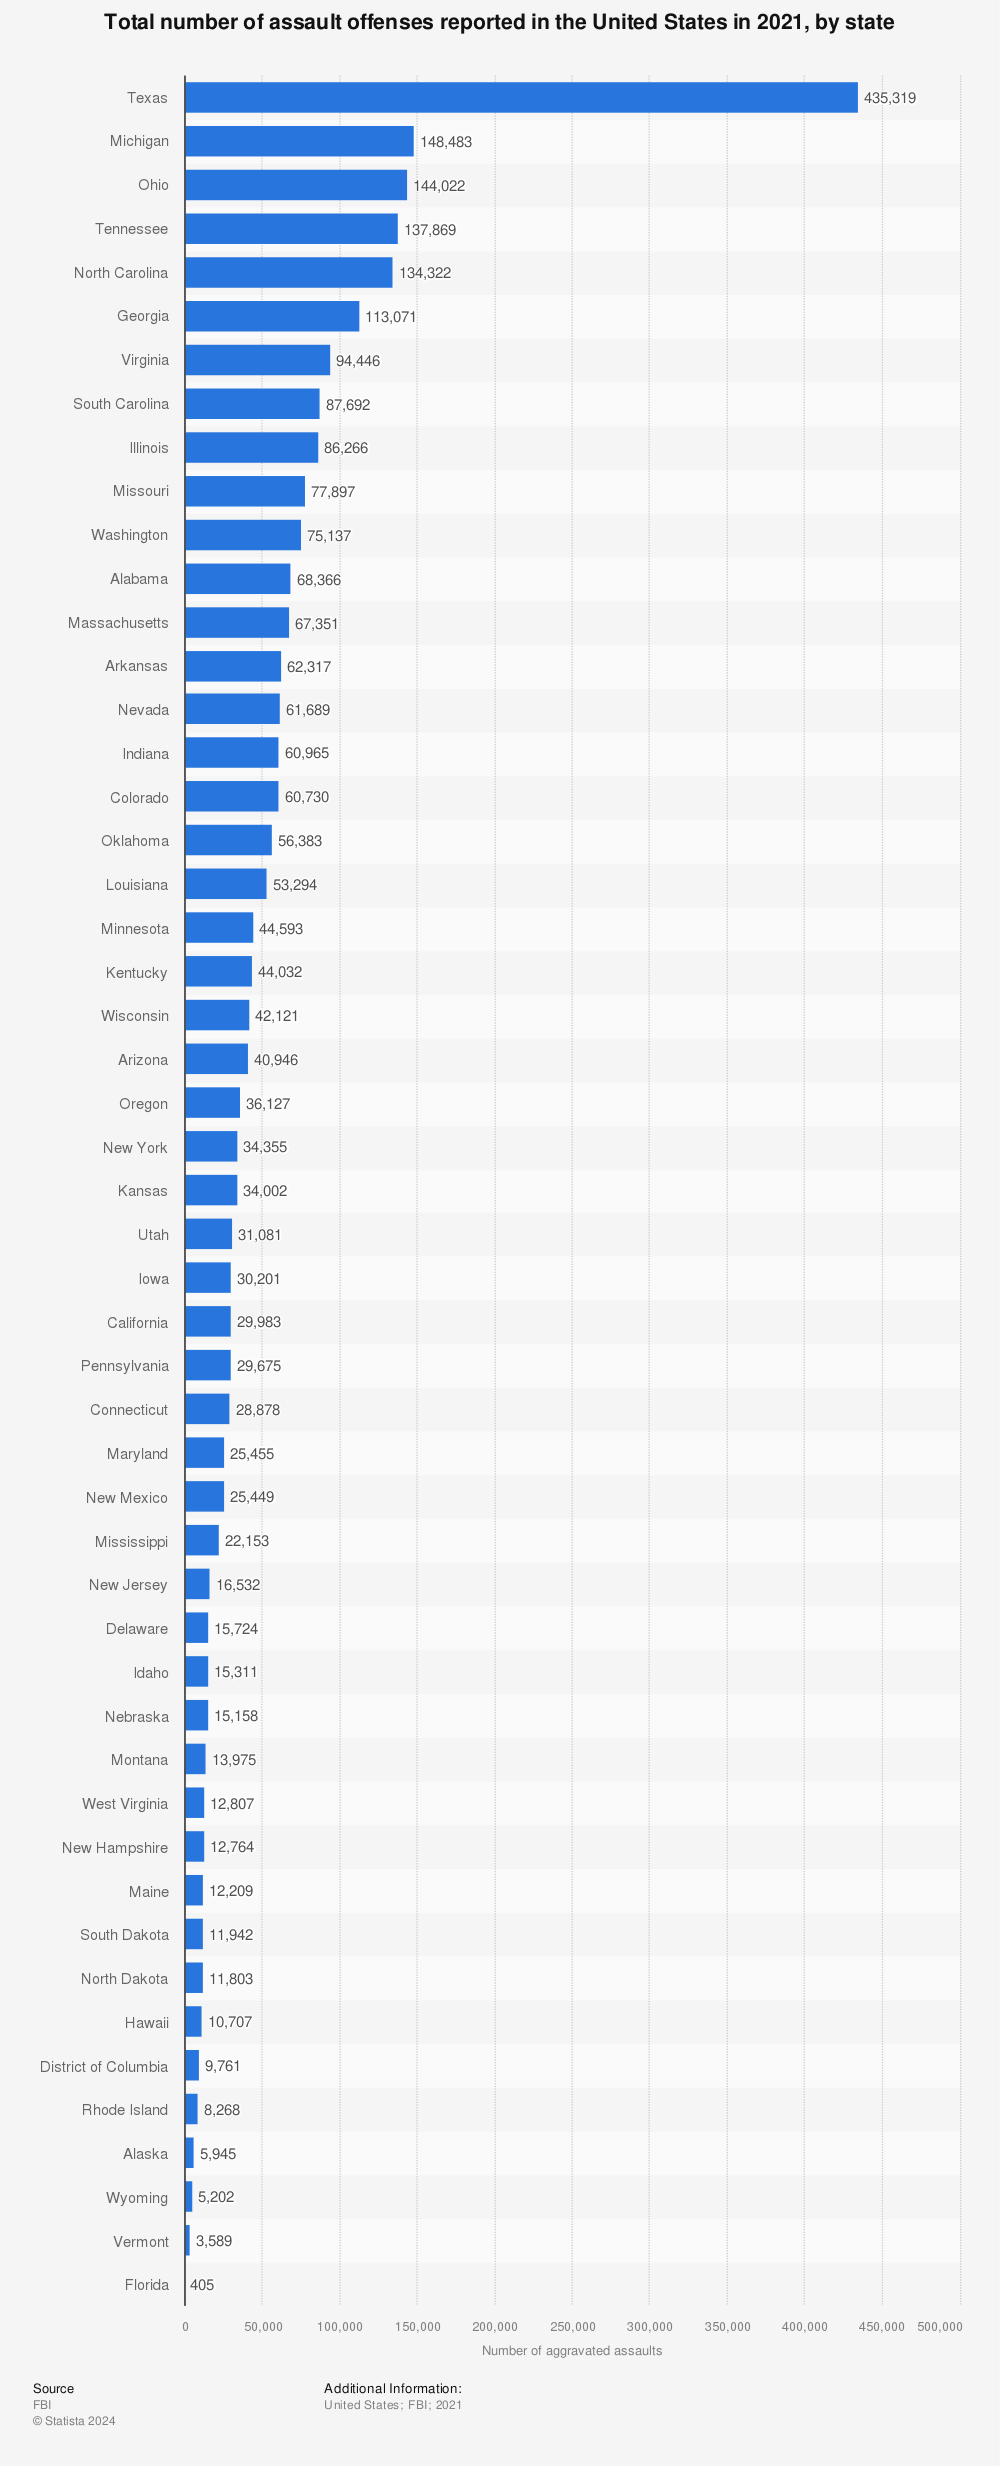 Statistic: Total number of aggravated assaults reported in the United States in 2018, by state | Statista